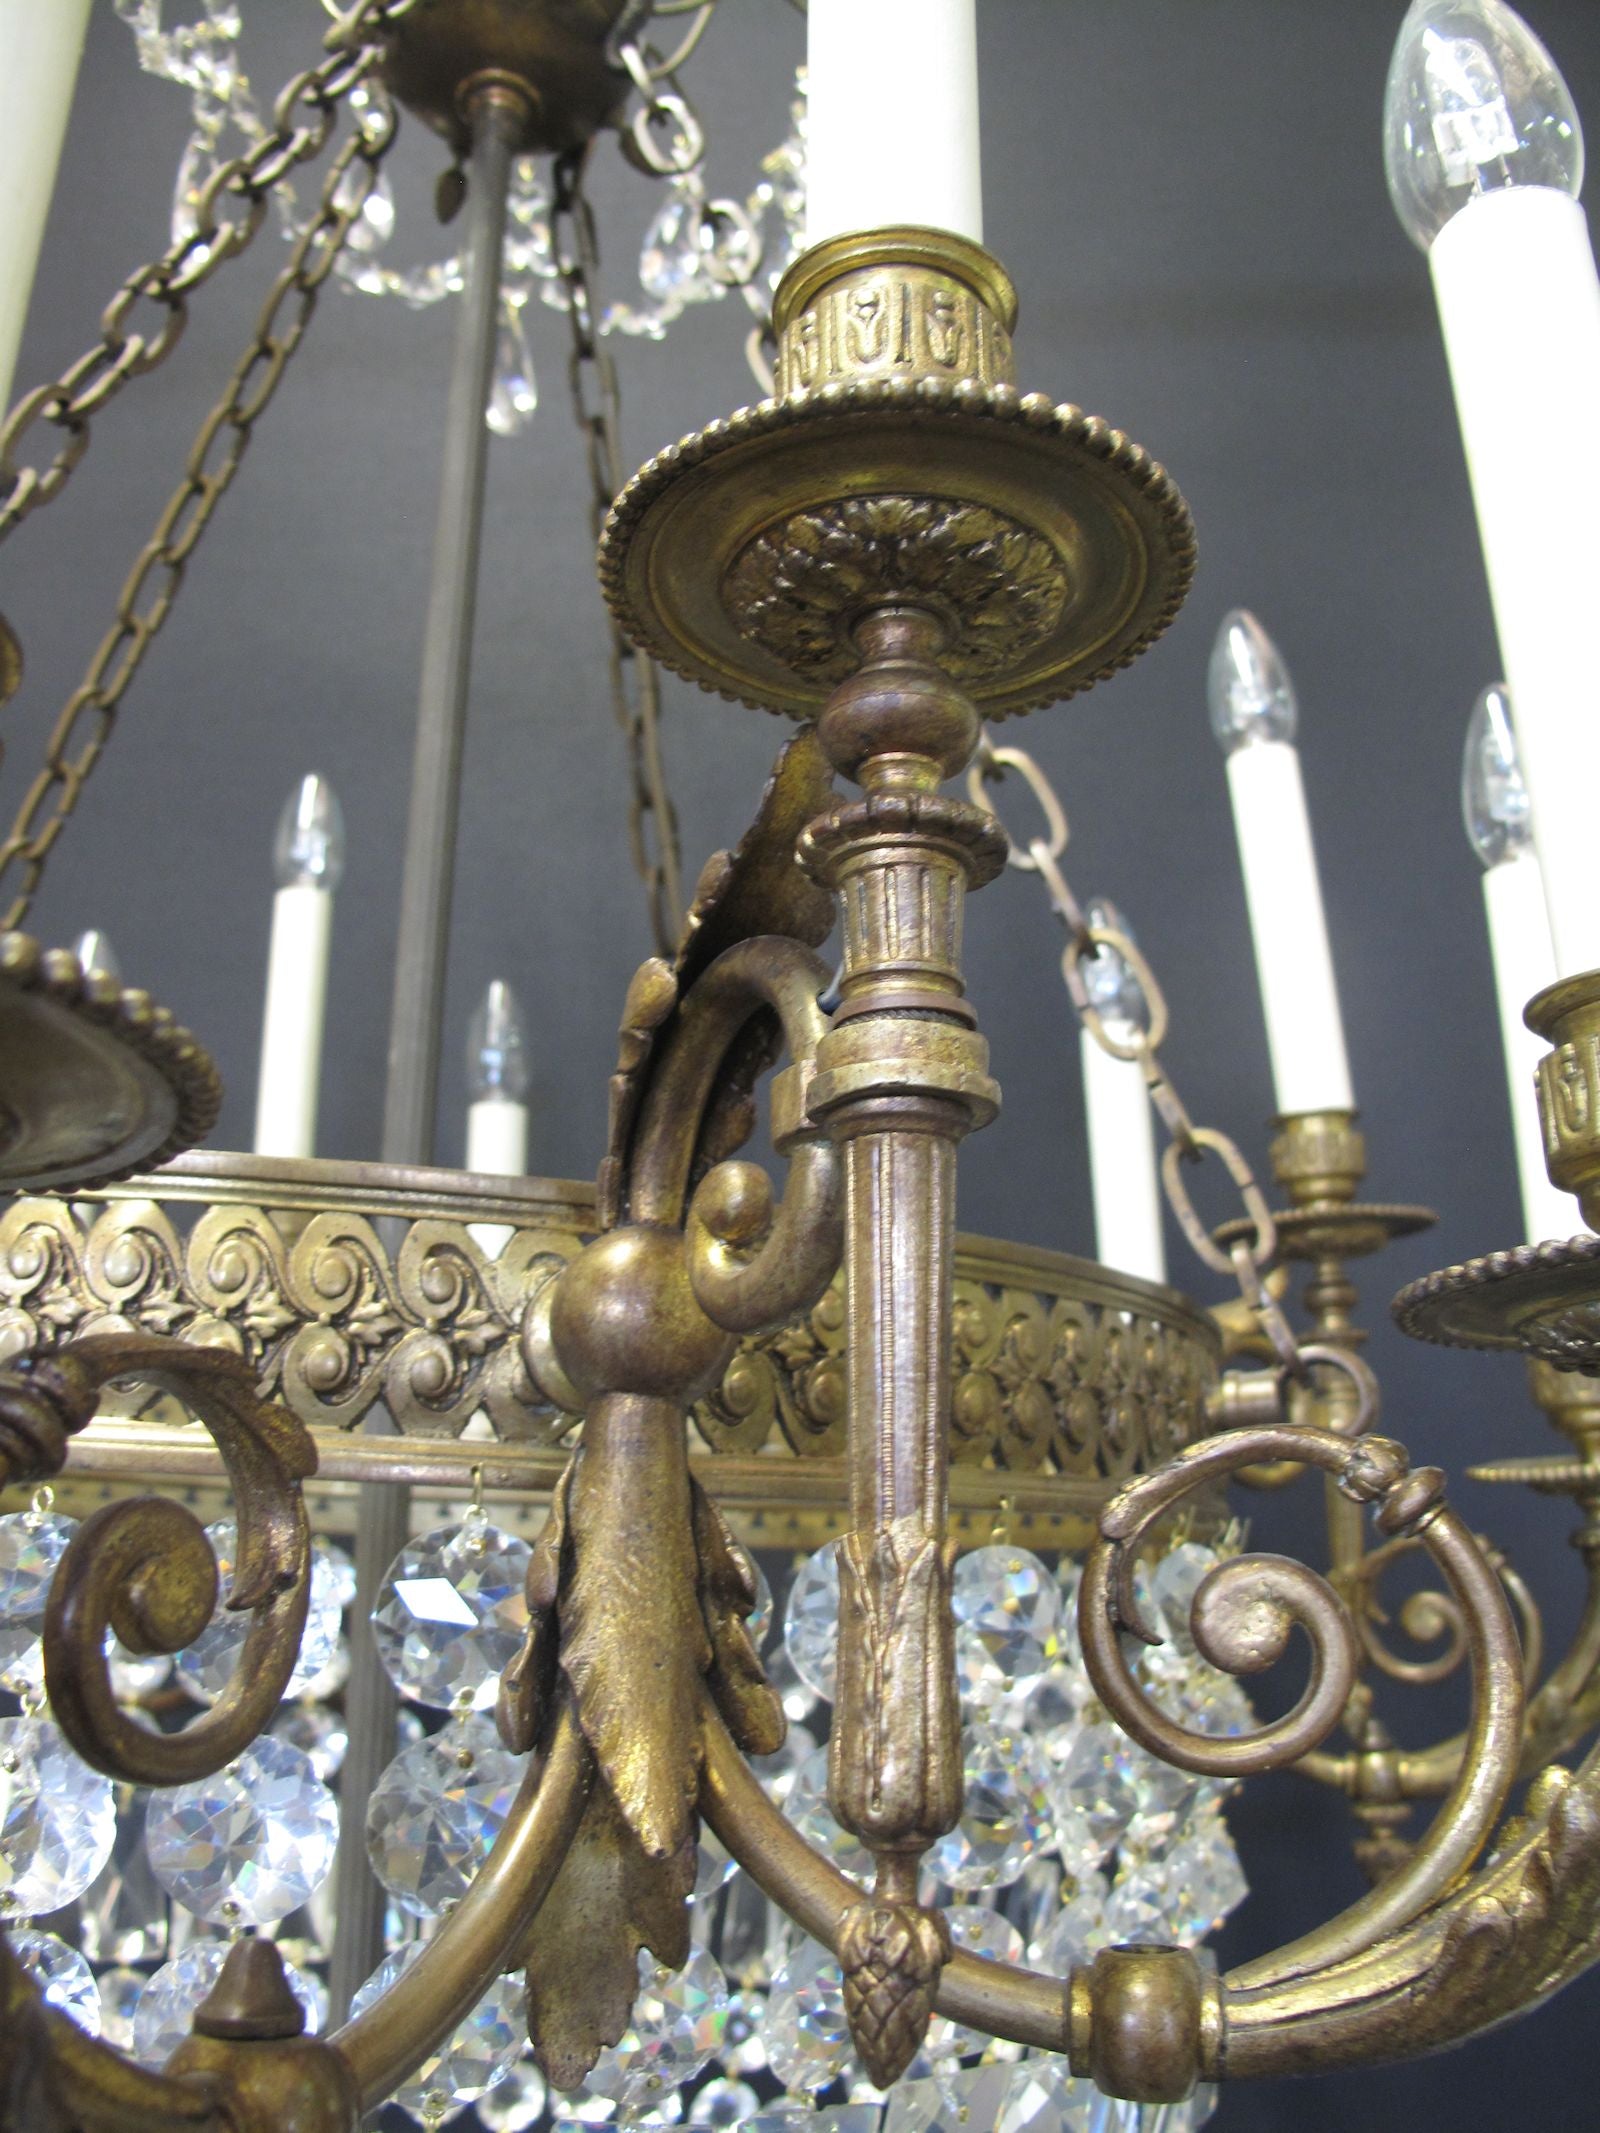 12 light ormolu and glass chandelier, showing arm casting